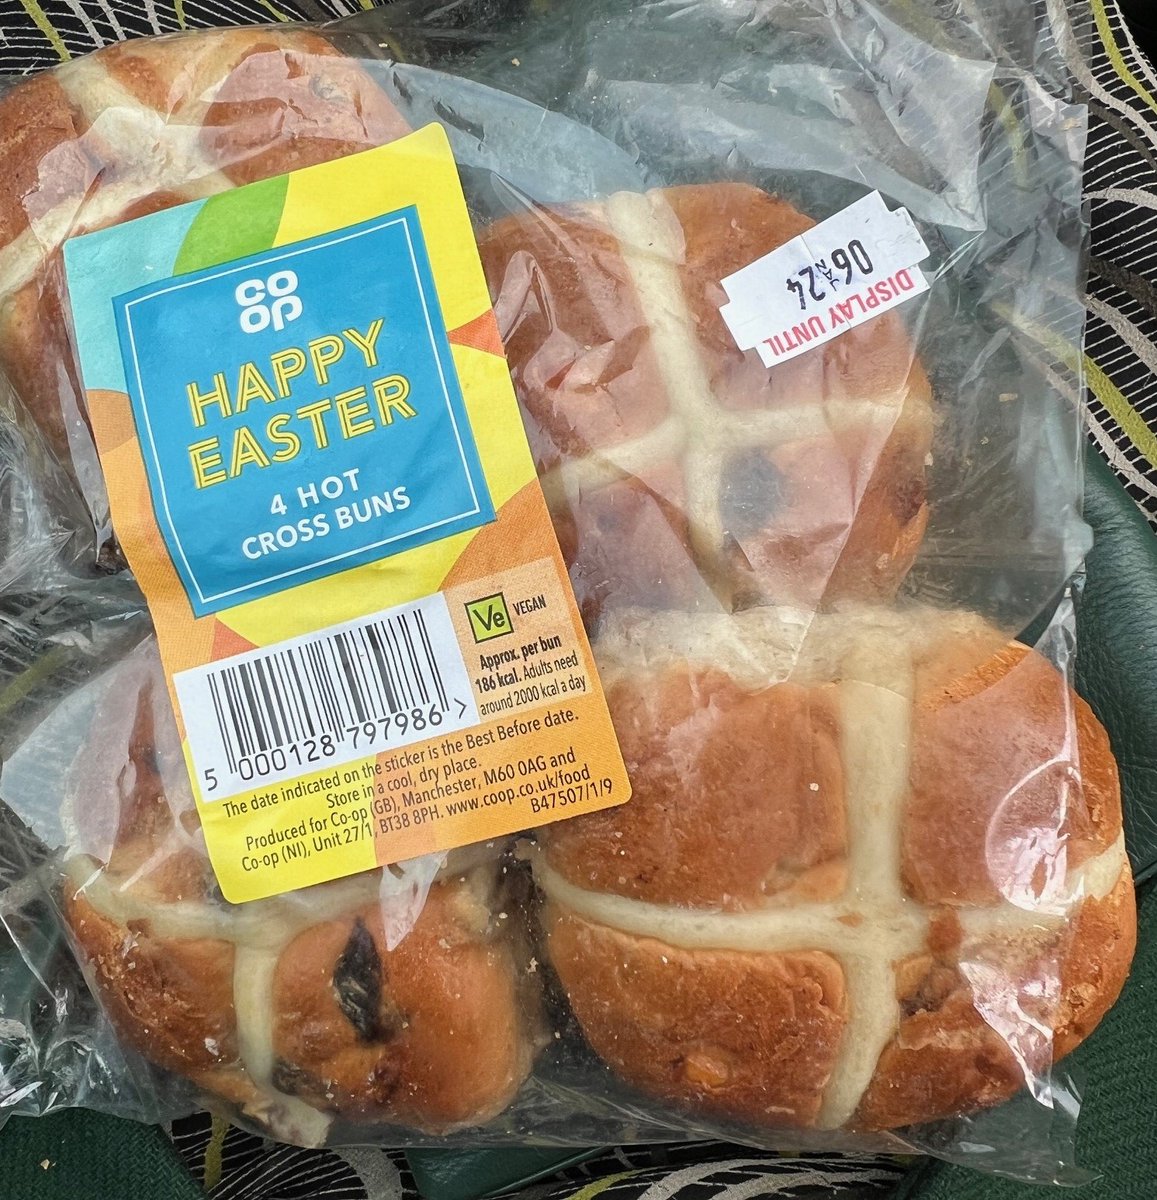 Hot cross buns and 'happy Easter' on Jan 2nd? Surely not @coopuk - it's not even epiphany yet!!